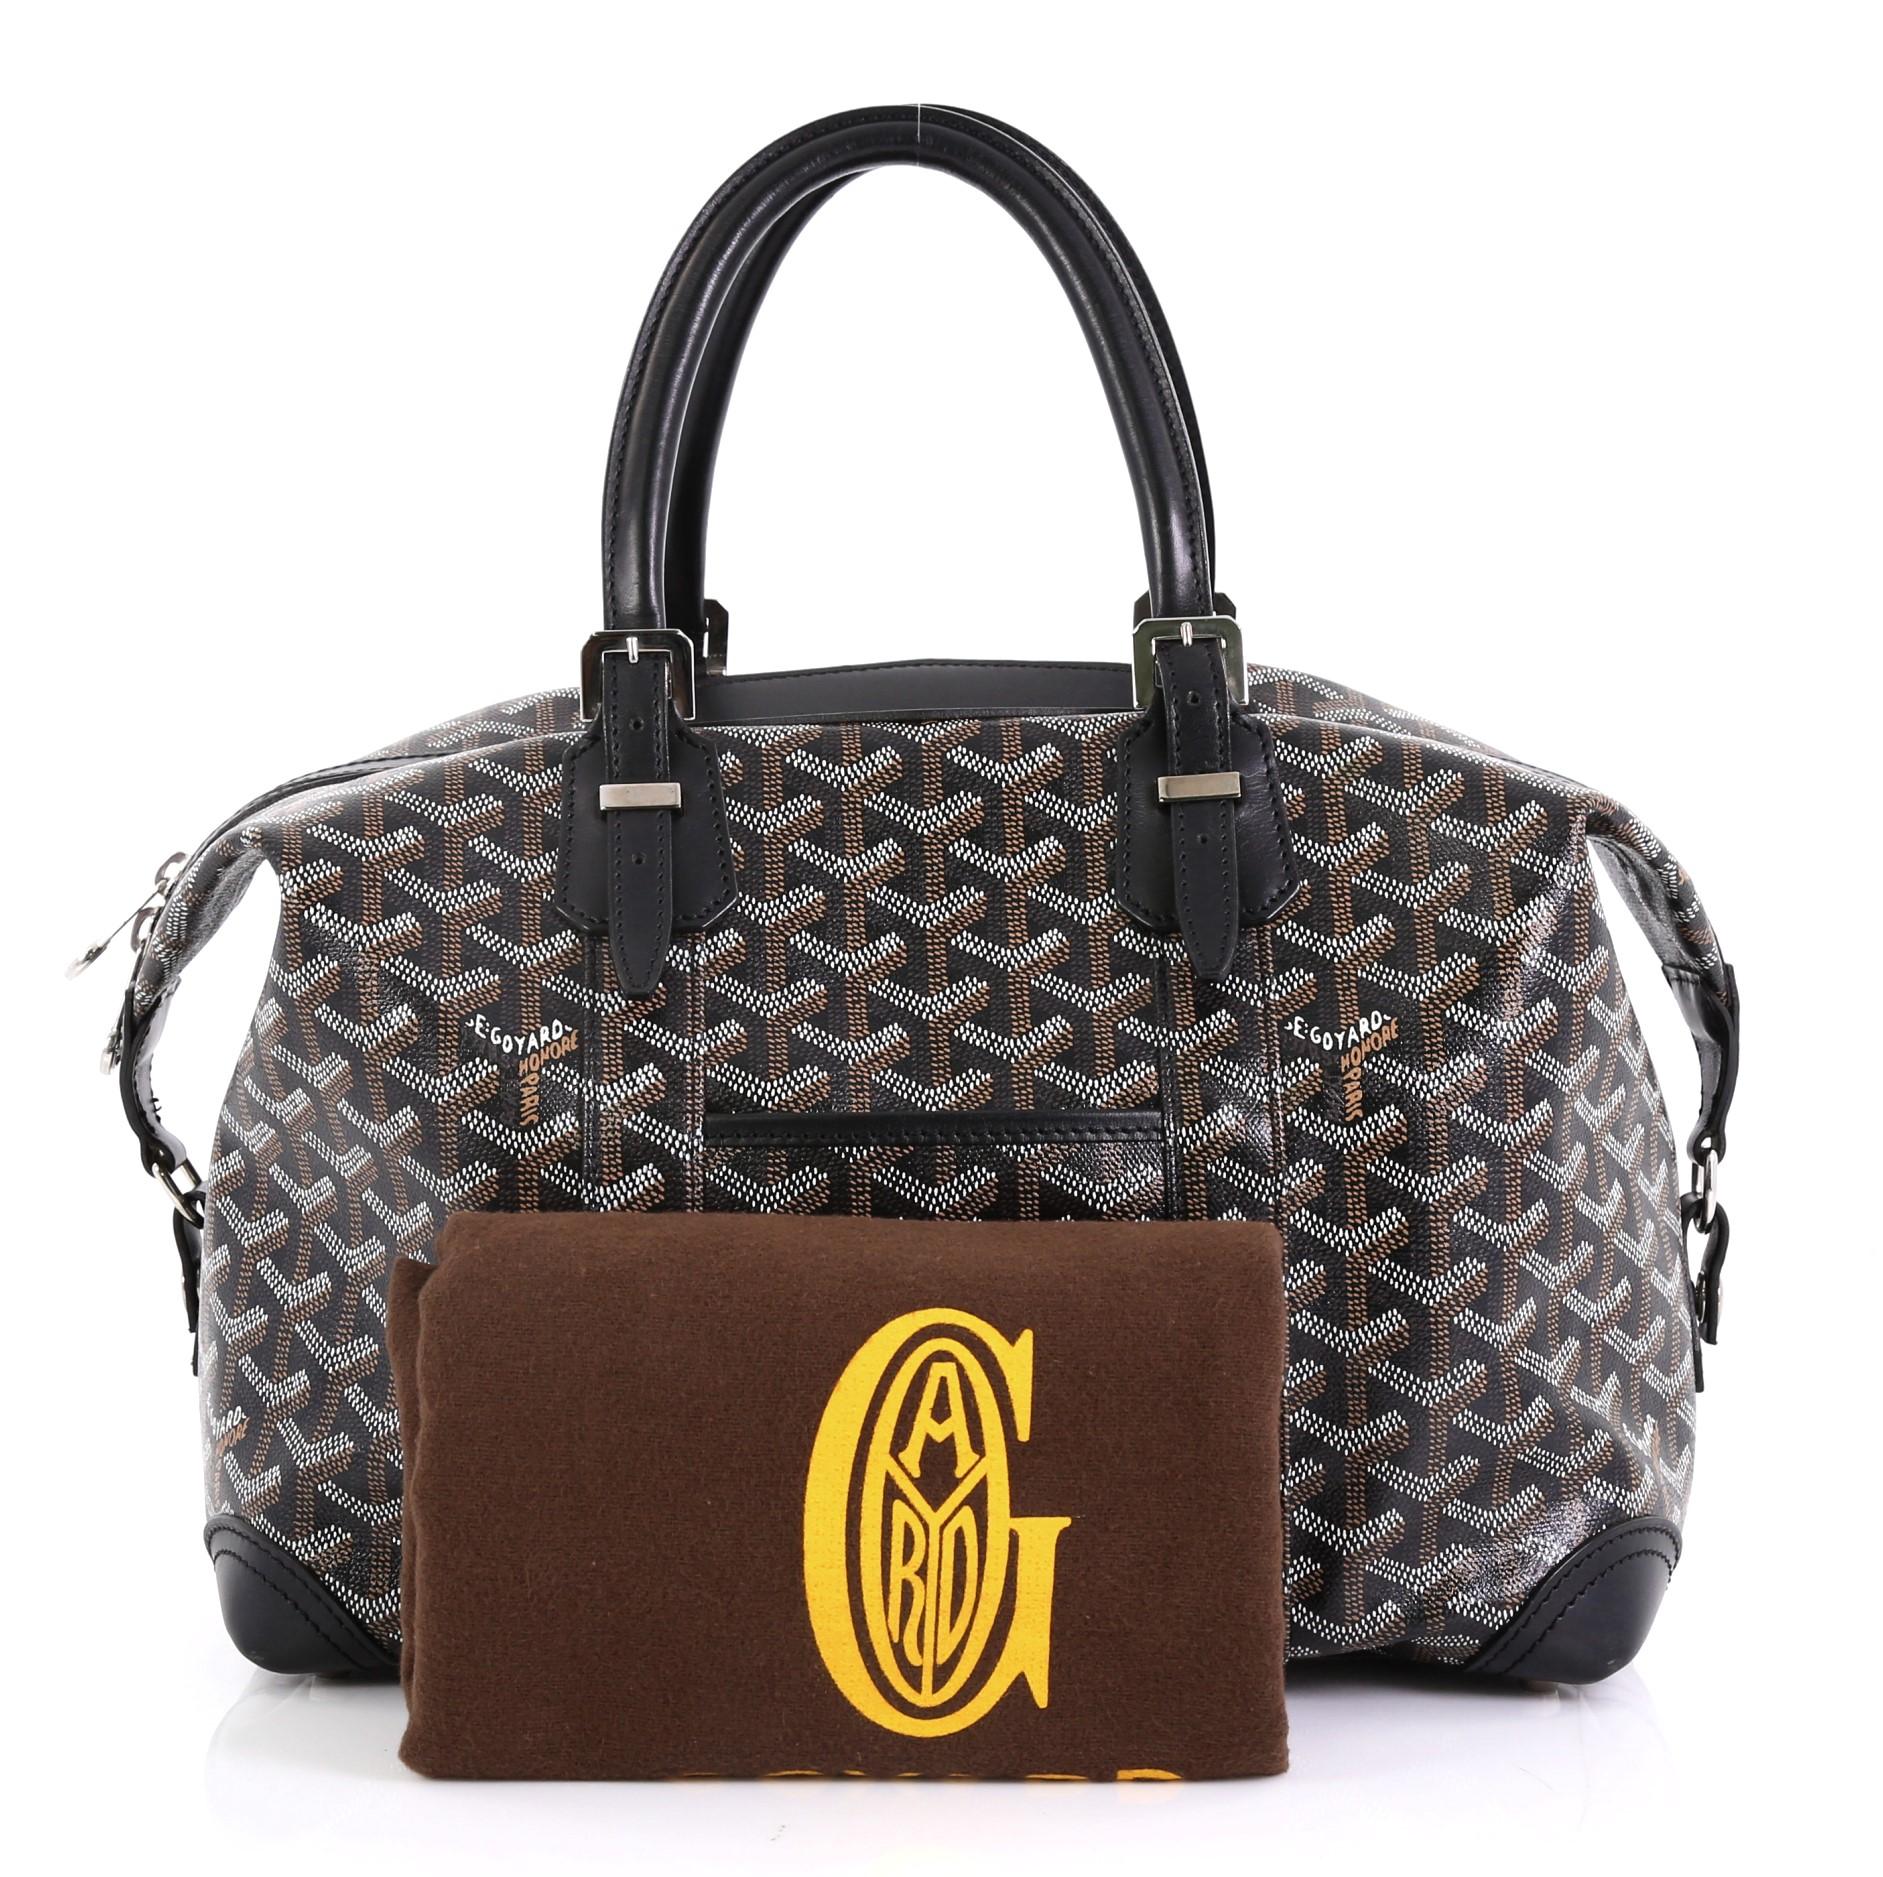 This Goyard Boeing Travel Bag Coated Canvas 30, crafted from black and brown coated canvas, features dual leather top handles, front slip pocket, and silver-tone hardware. Its two-way top zip closure opens to a yellow fabric interior with zip